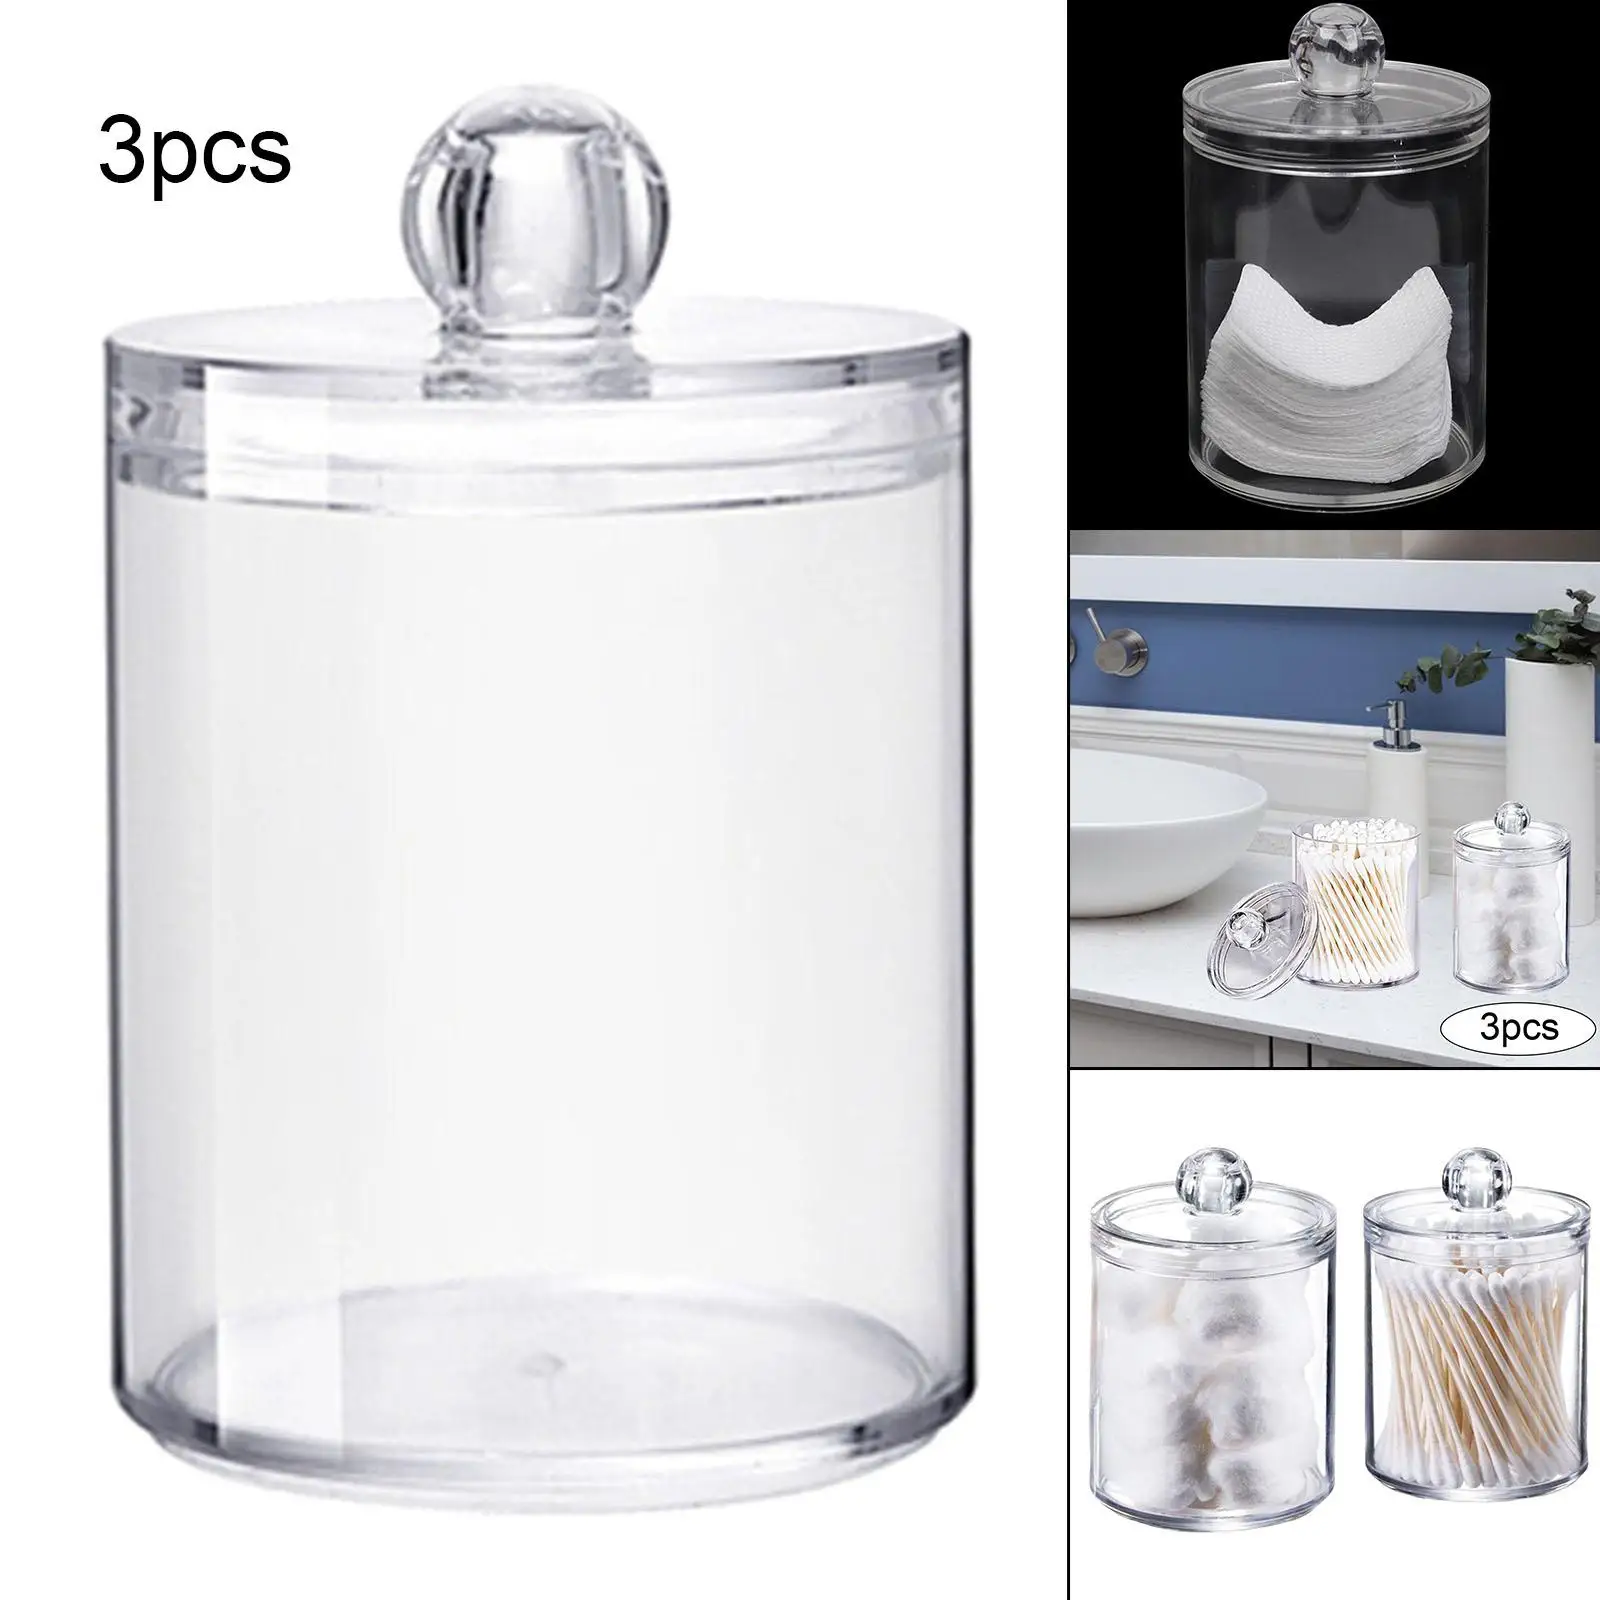 Acrylic 3 Pack Apothecary Jars with Lids Clear Bathroom Organizer Cotton Swab Ball Pad Holder for Floss Cotton Round Pads Q Tips